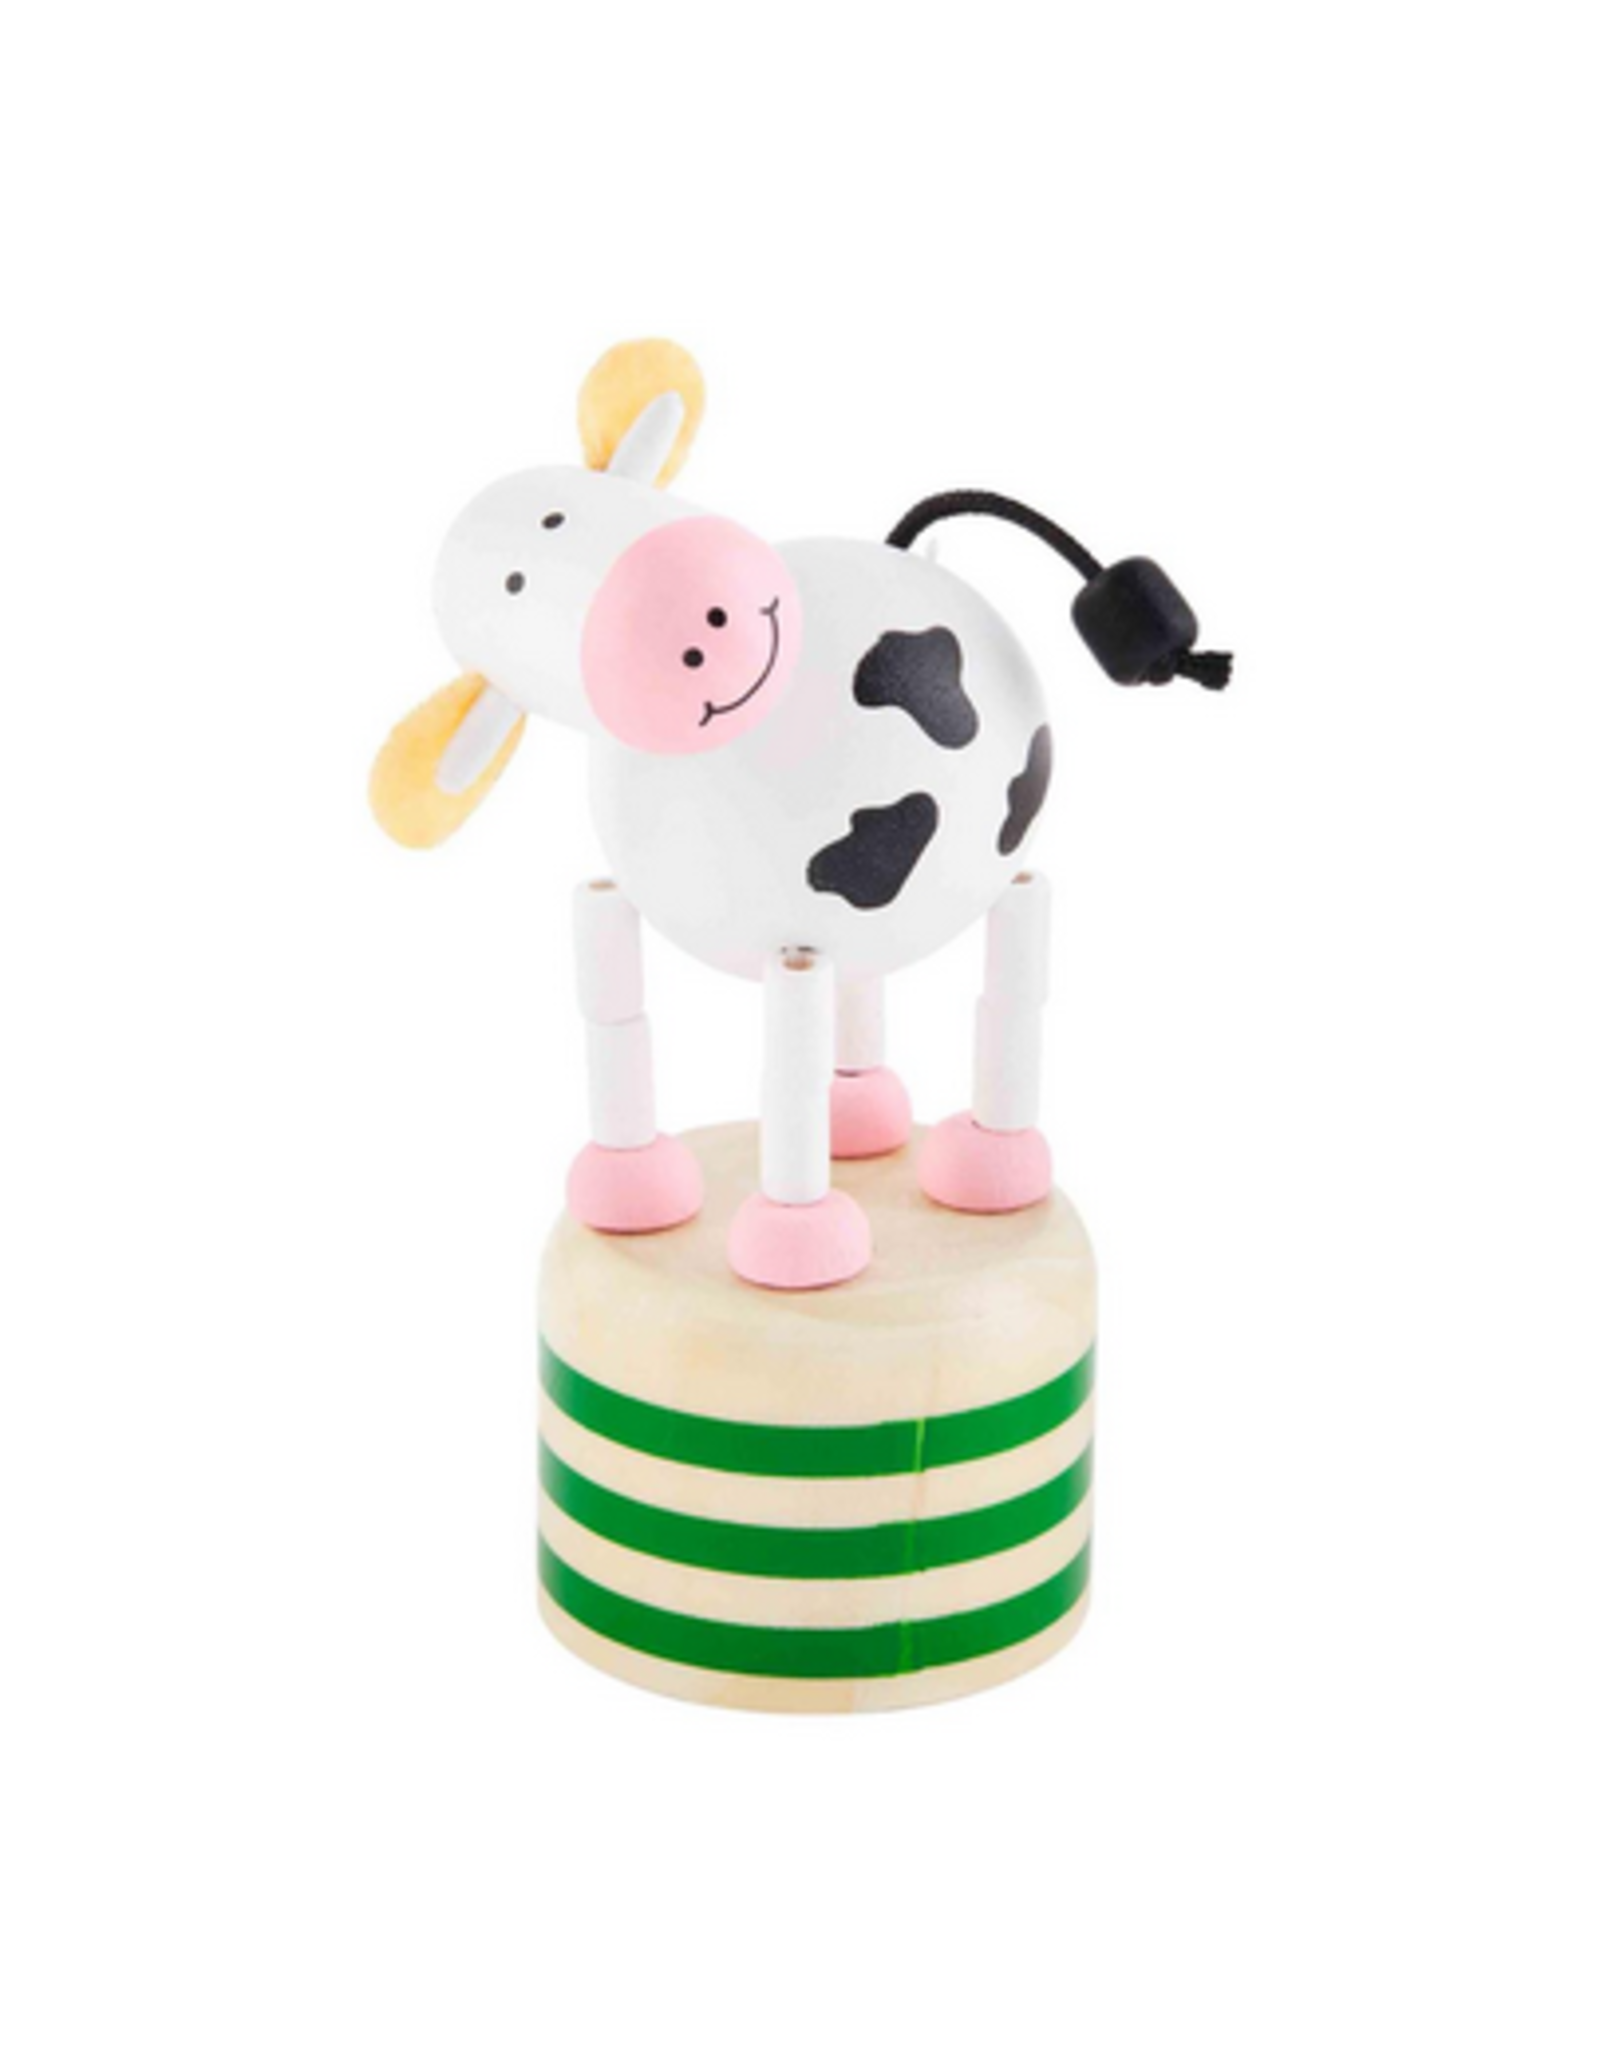 Mudpie Collapsible Wood Toy-Cow